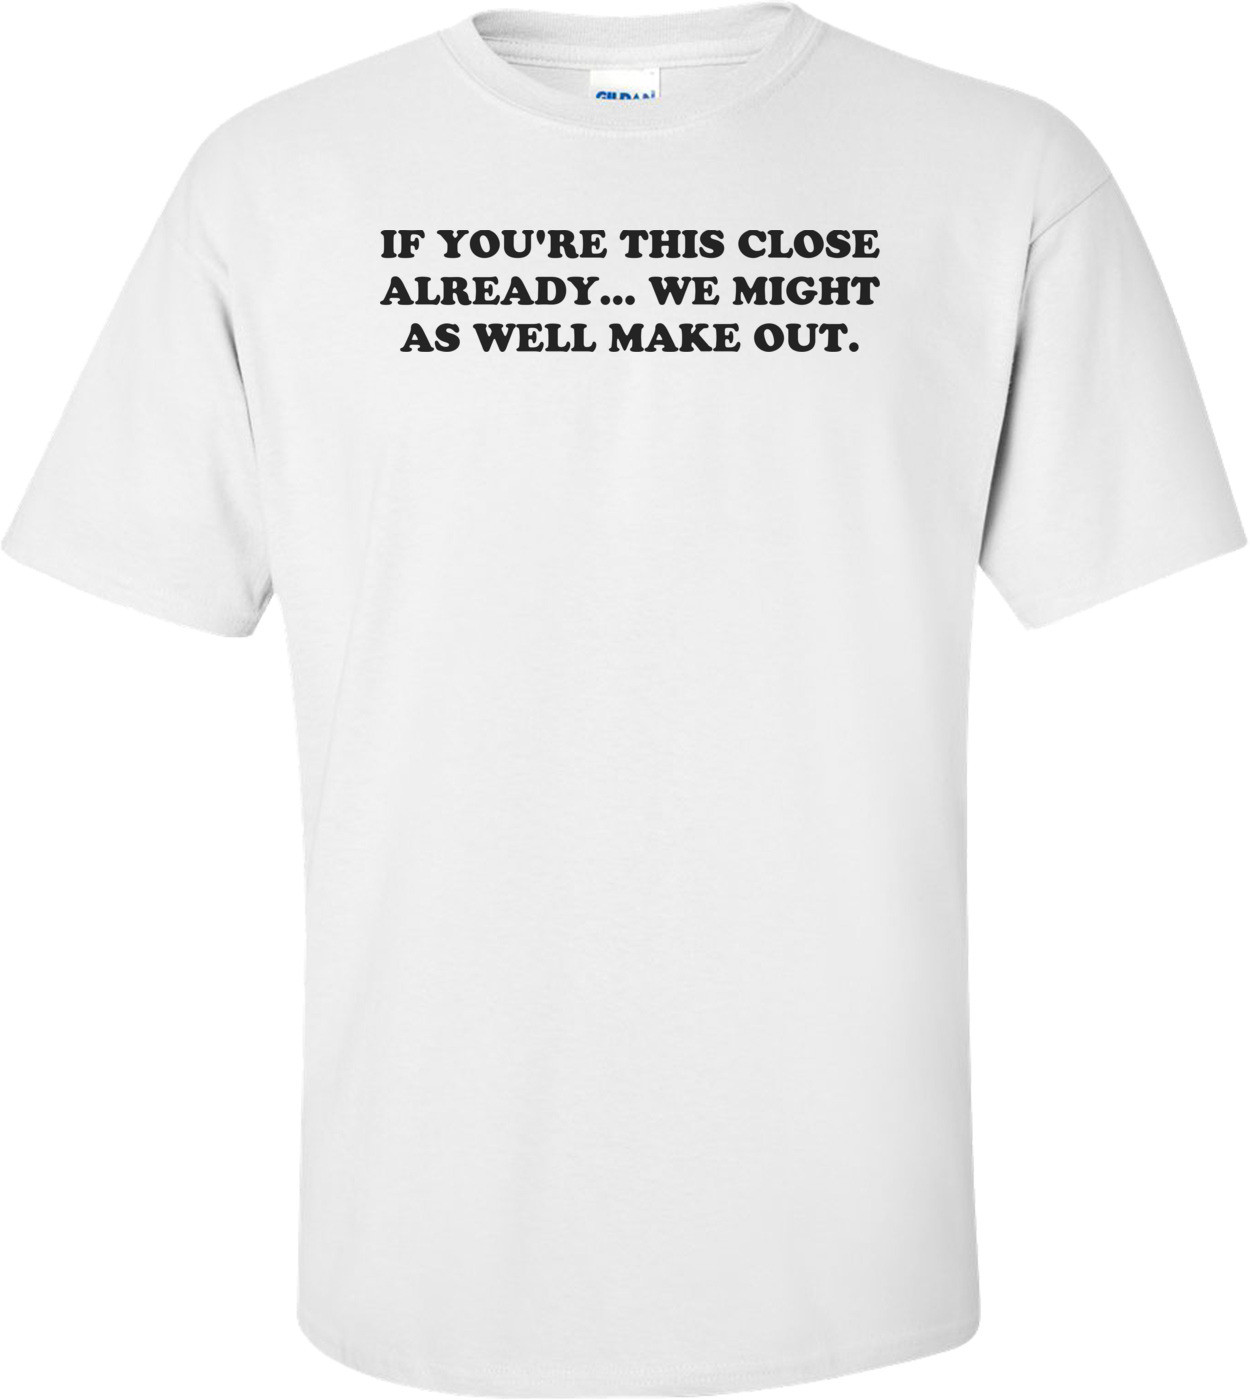 IF YOU'RE THIS CLOSE ALREADY... WE MIGHT AS WELL MAKE OUT. Shirt